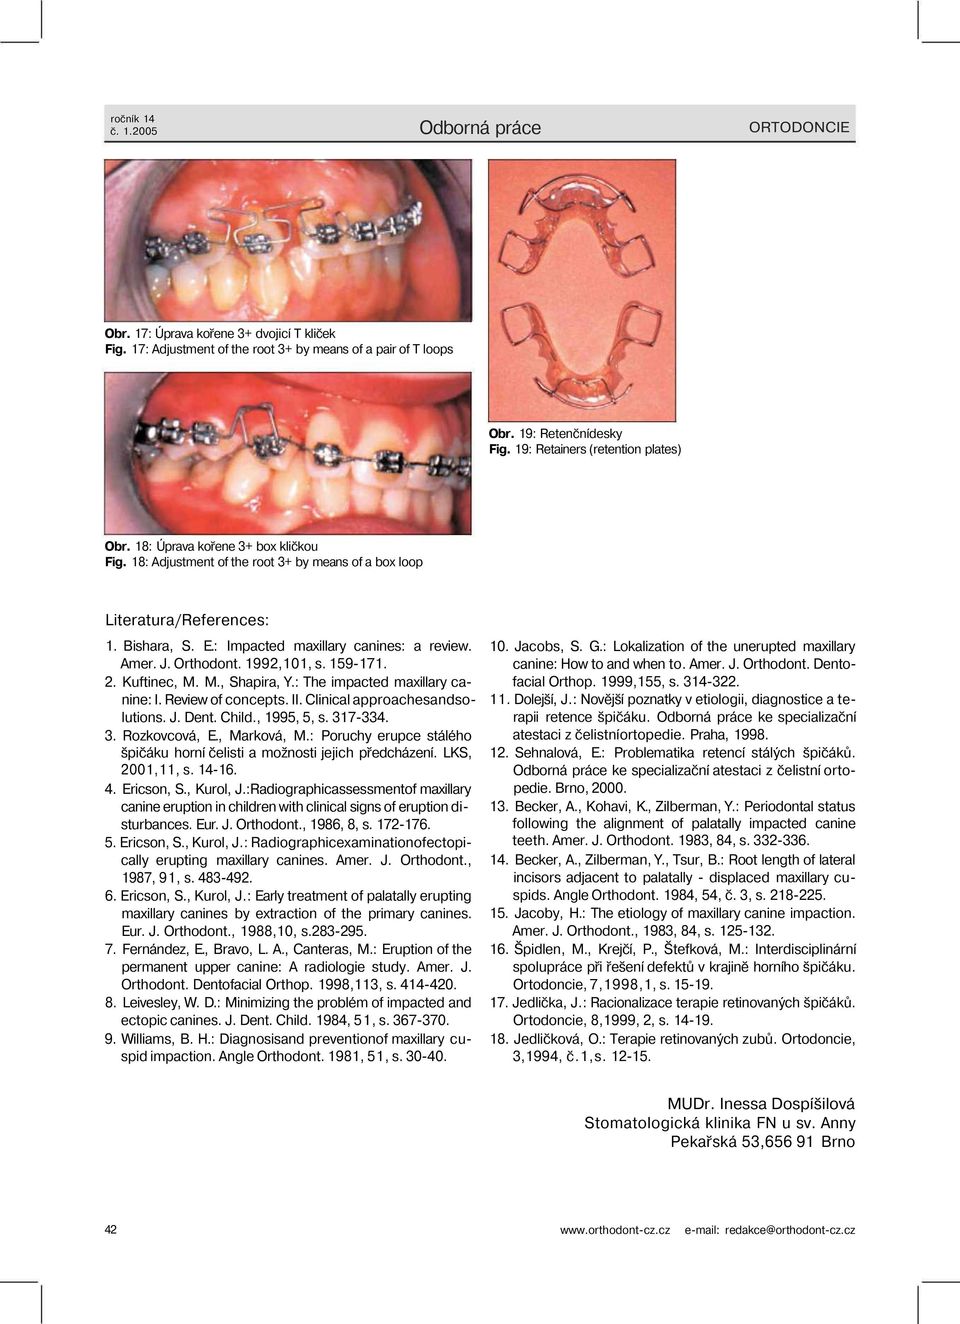 1992,101, s. 159-171. 2. Kuftinec, M. M., Shapira, Y.: The impacted maxillary canine: I. Review of concepts. II. Clinical approachesandsolutions. J. Dent. Child., 1995, 5, s. 317-334. 3. Rozkovcová, E.